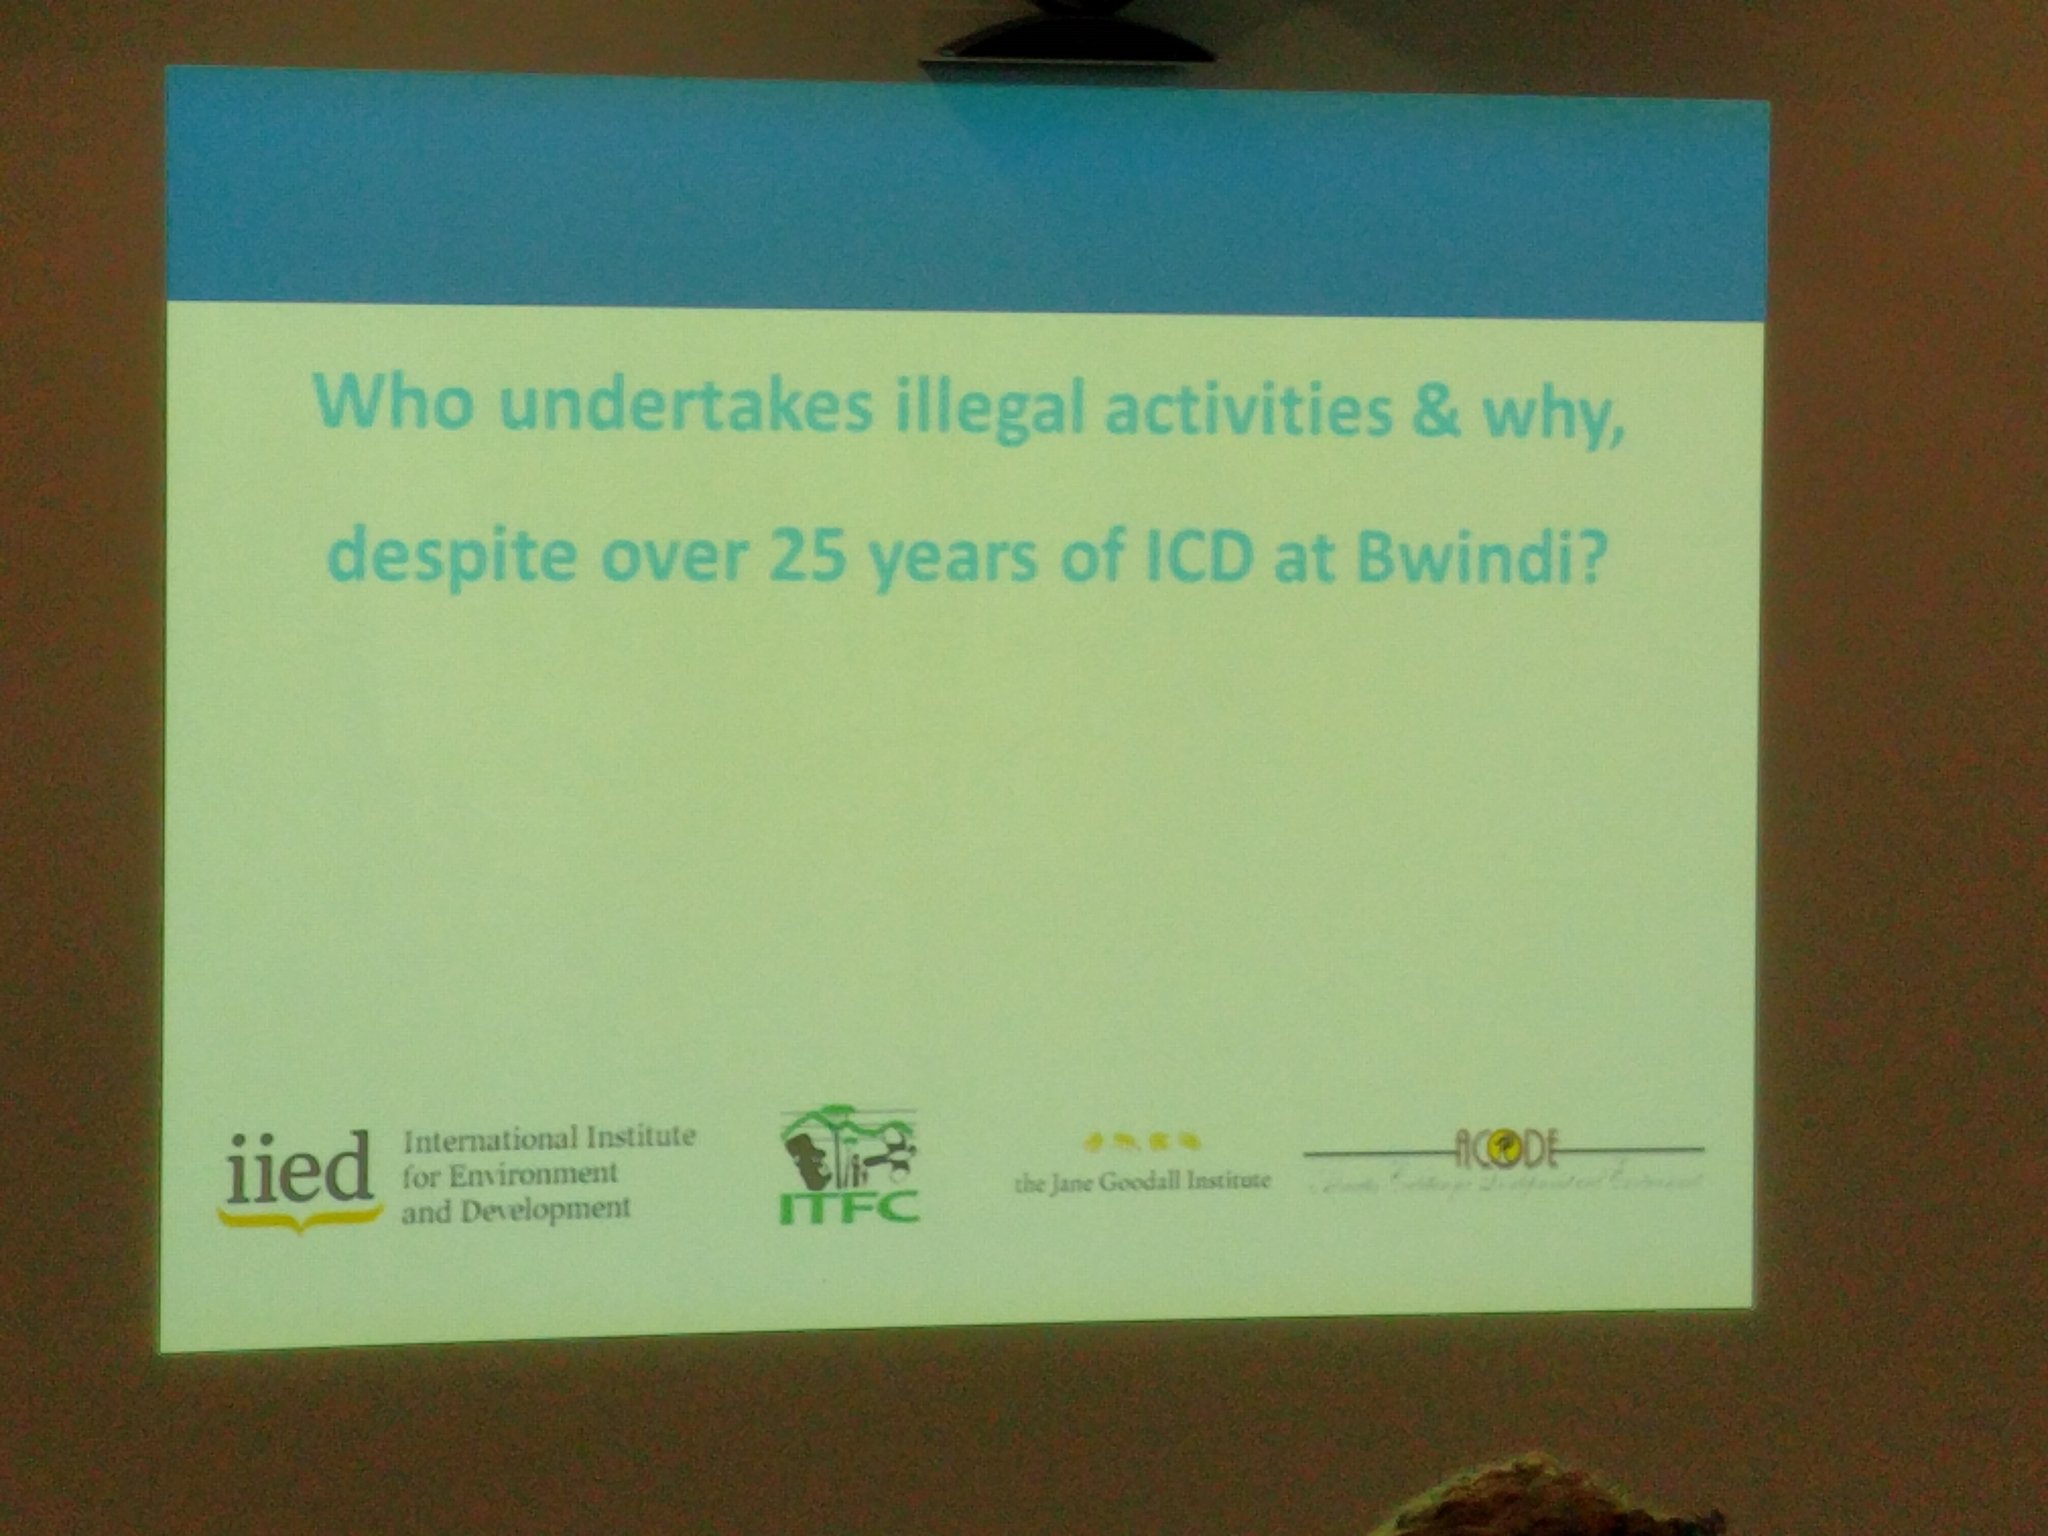 Learning about the indirect questioning technique used in the integrated conservation & development project at #Bwindi now. https://t.co/8cp1qvzChr